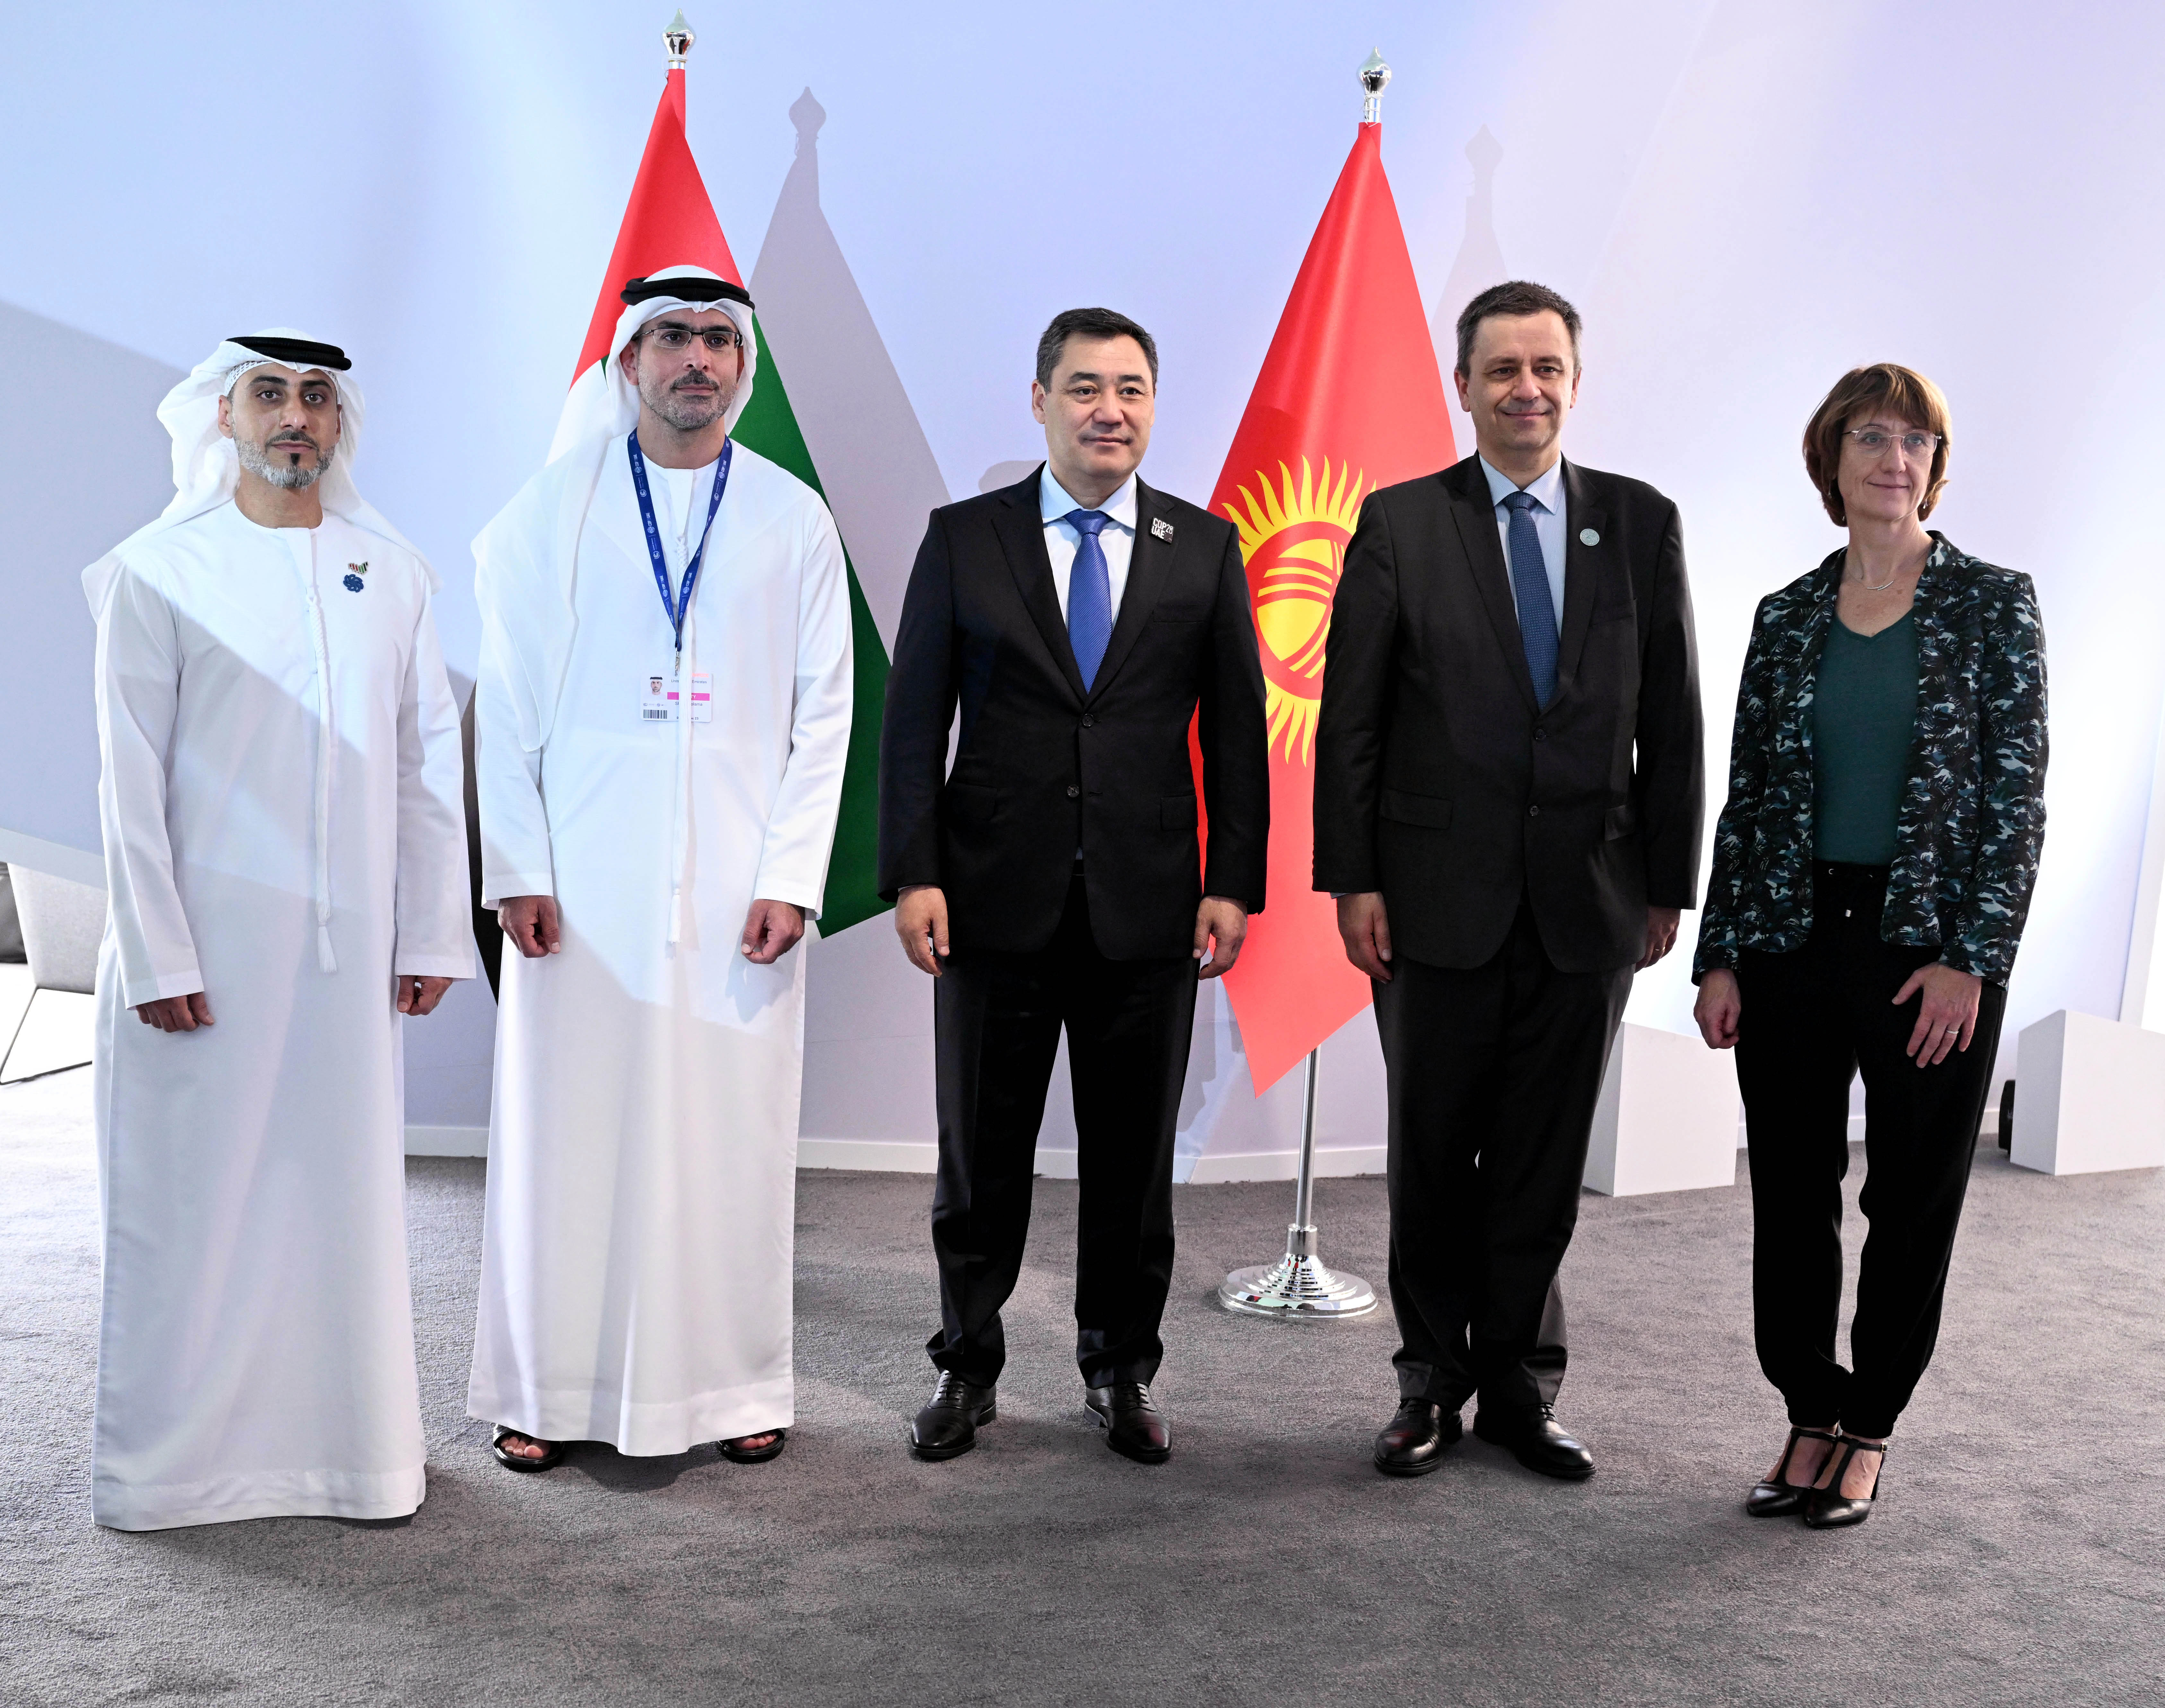 Kyrgyzstan's Ministry of Energy, Masdar, and Électricité de France (EDF) signed an agreement to enhance clean energy initiatives in Kyrgyzstan.